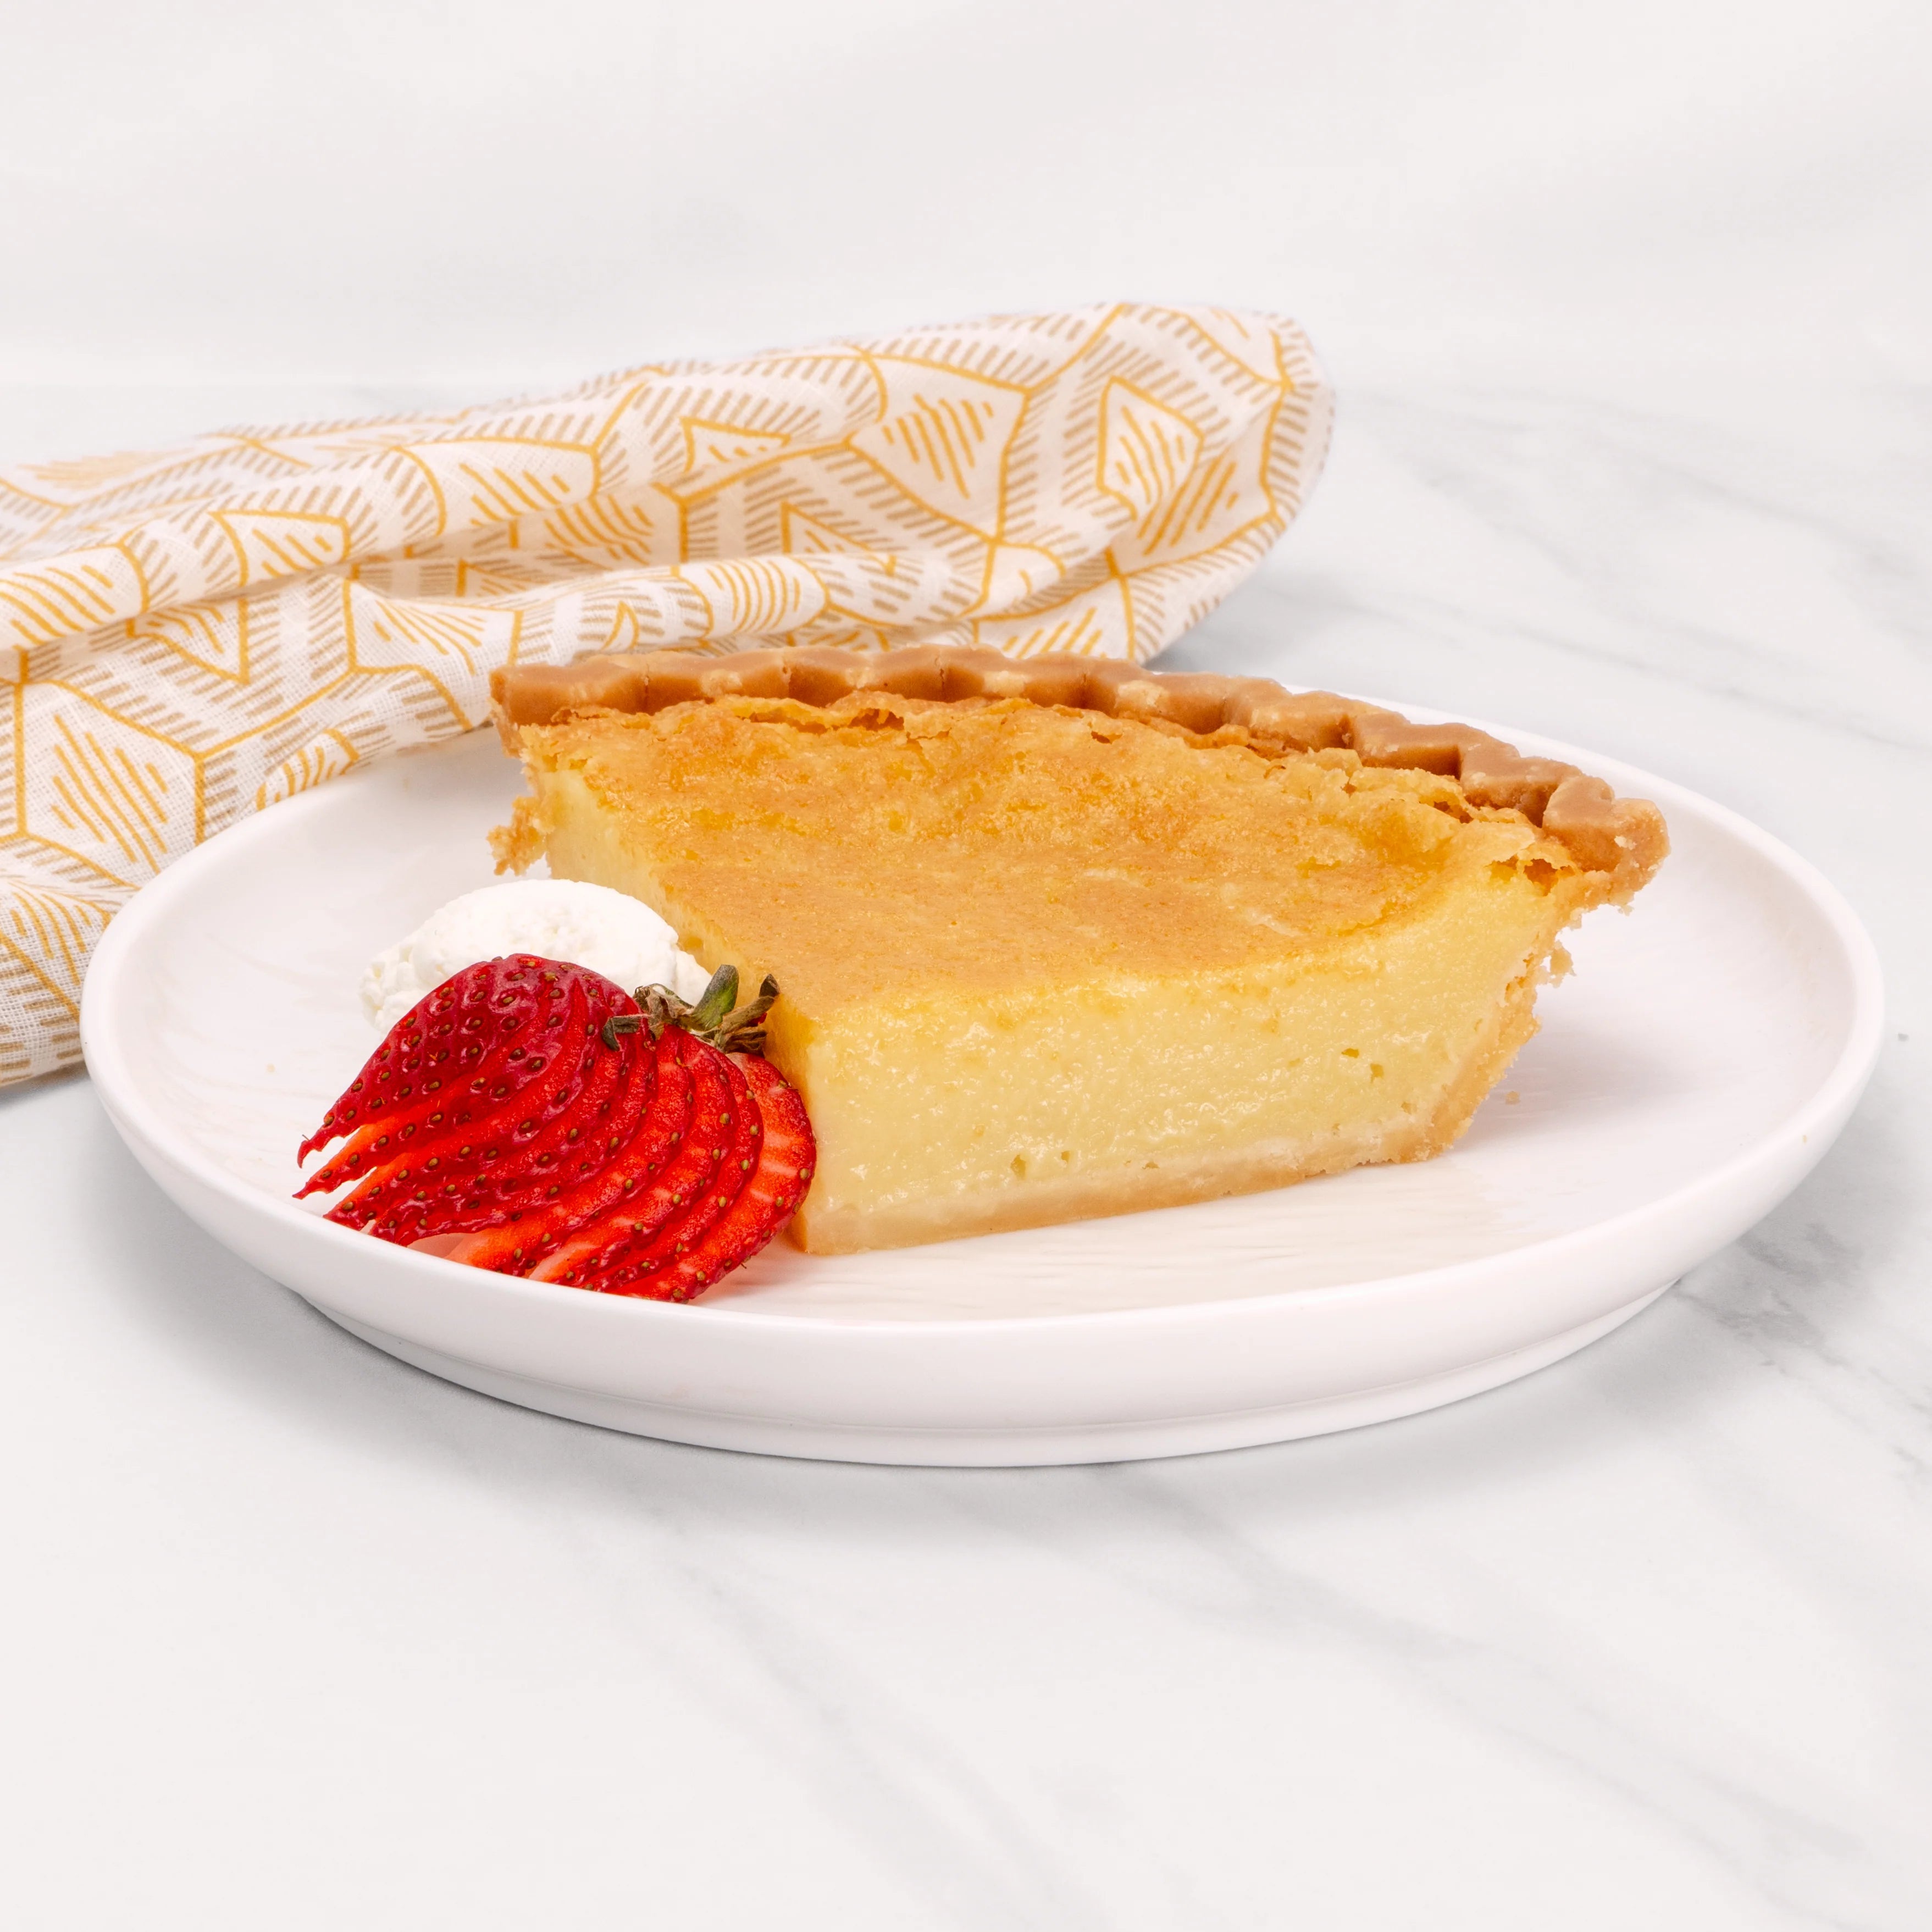 A slice of Gluten Free Buttermilk pie garnished with sliced strawberries and crème.